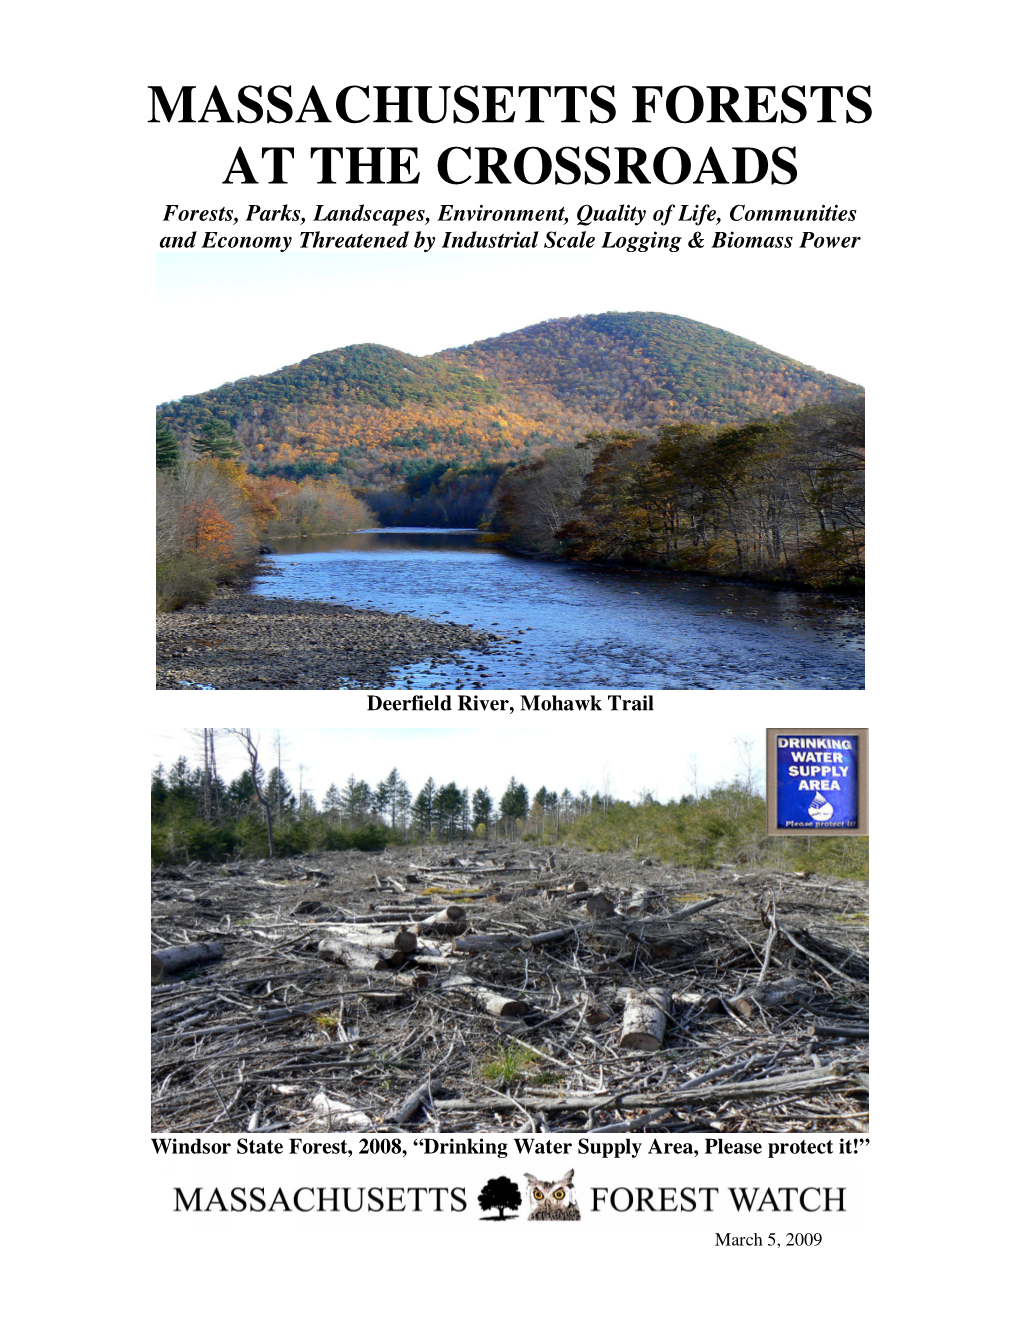 Massachusetts Forests at the Crossroads